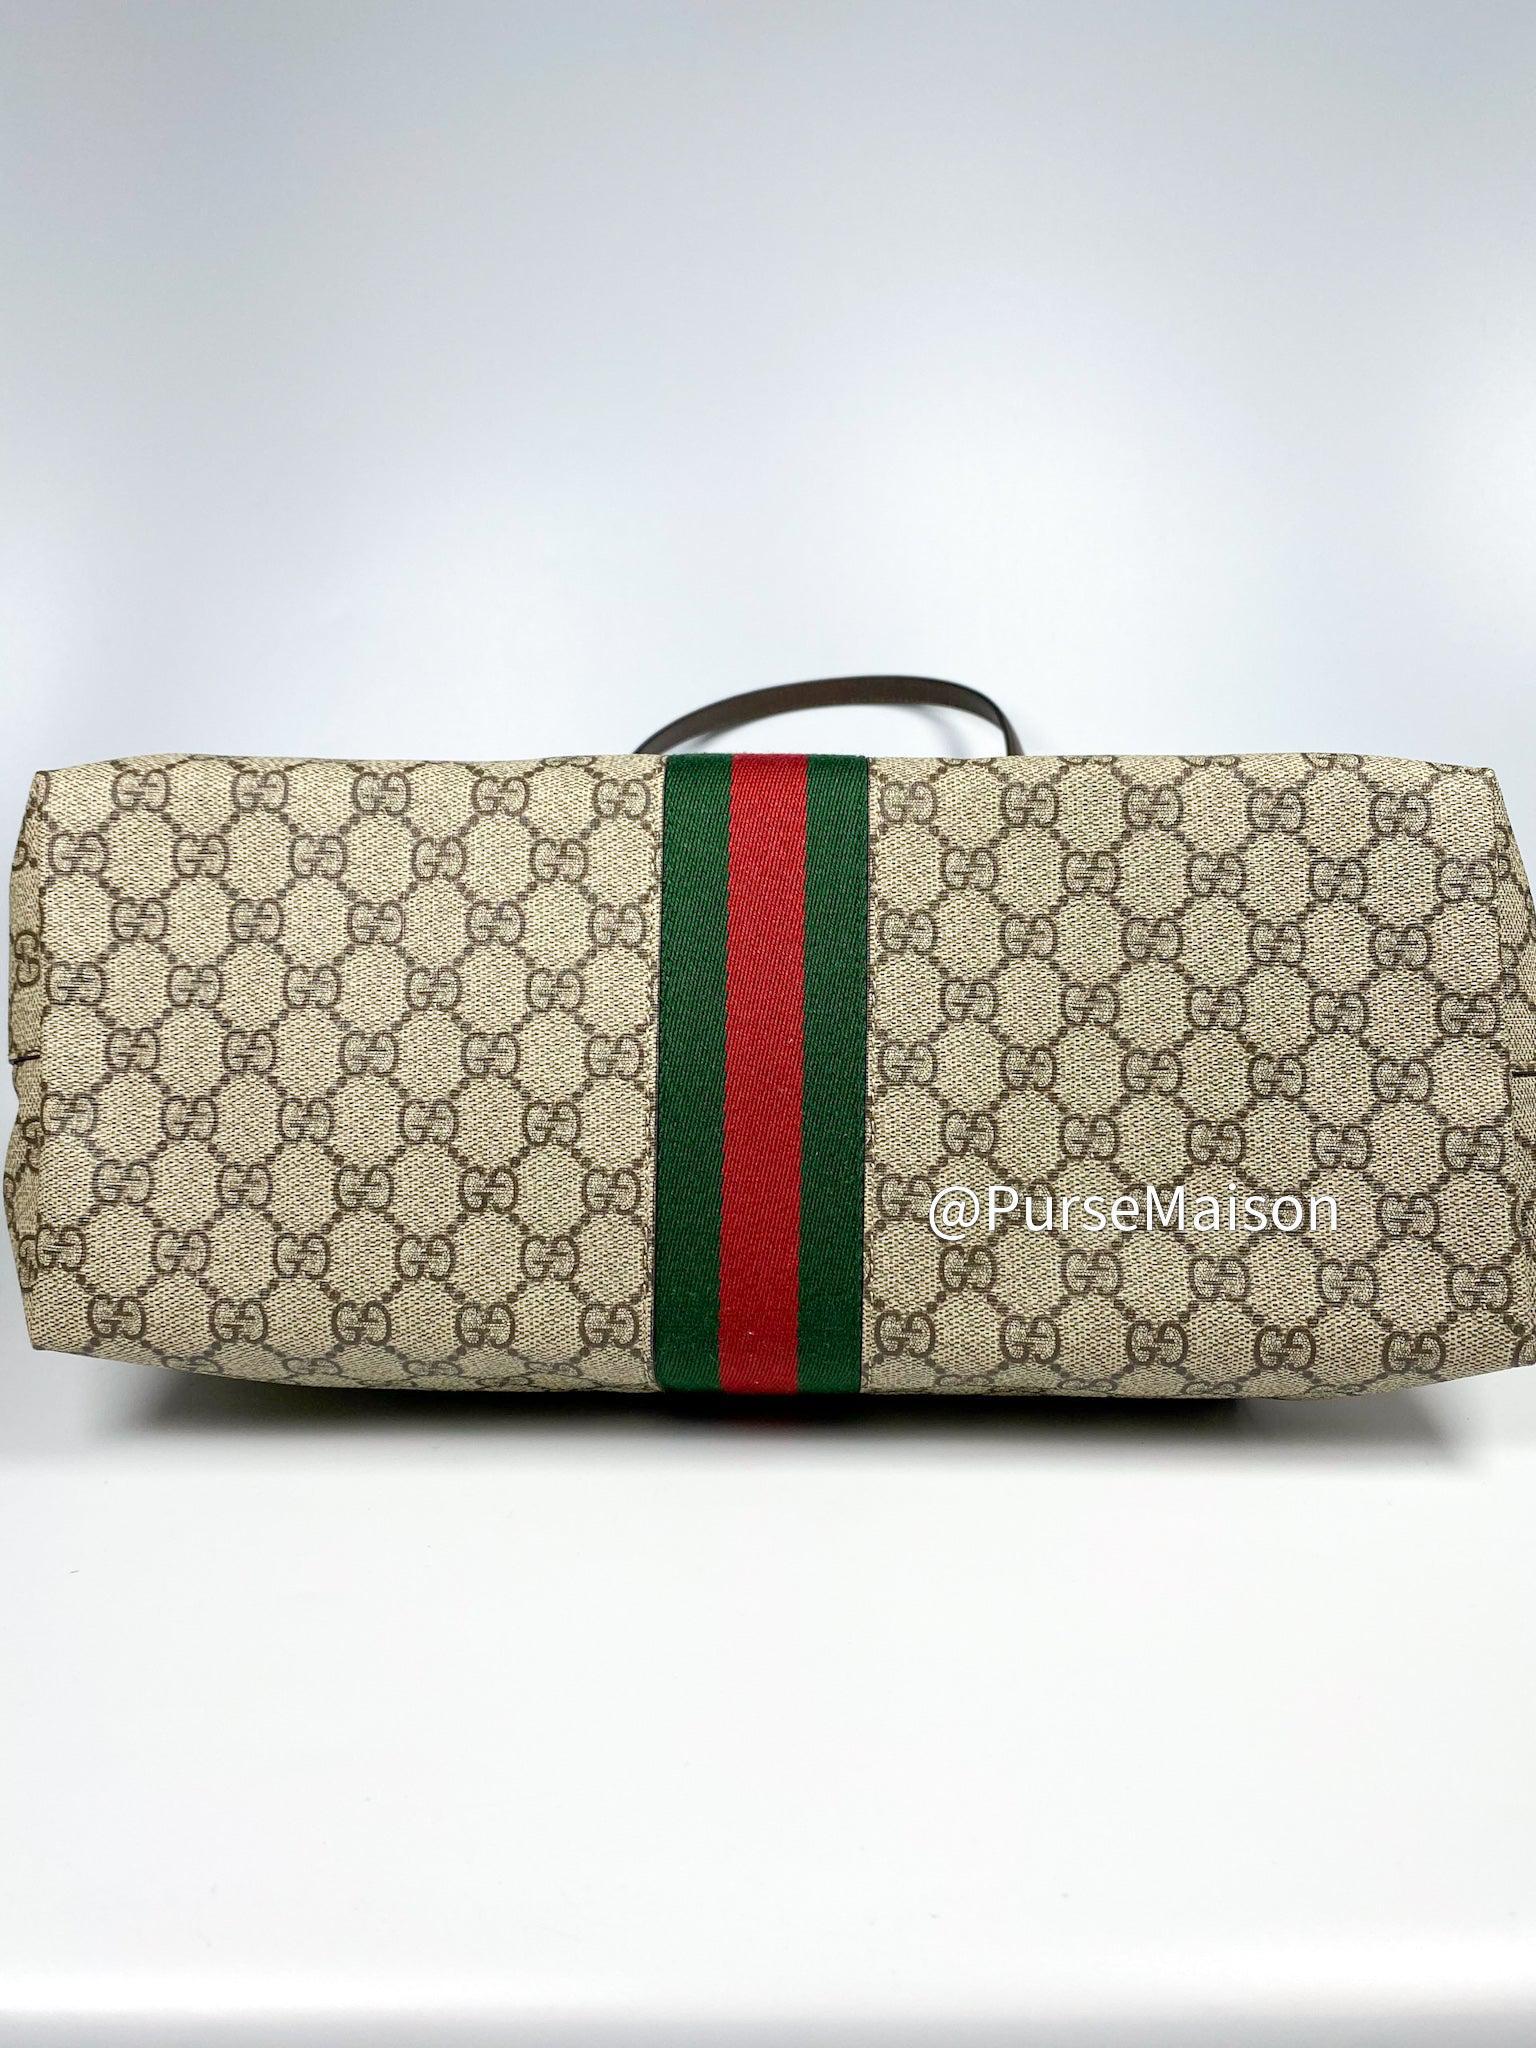 Gucci Ophidia GG Medium Tote Bag in Beige and Ebony